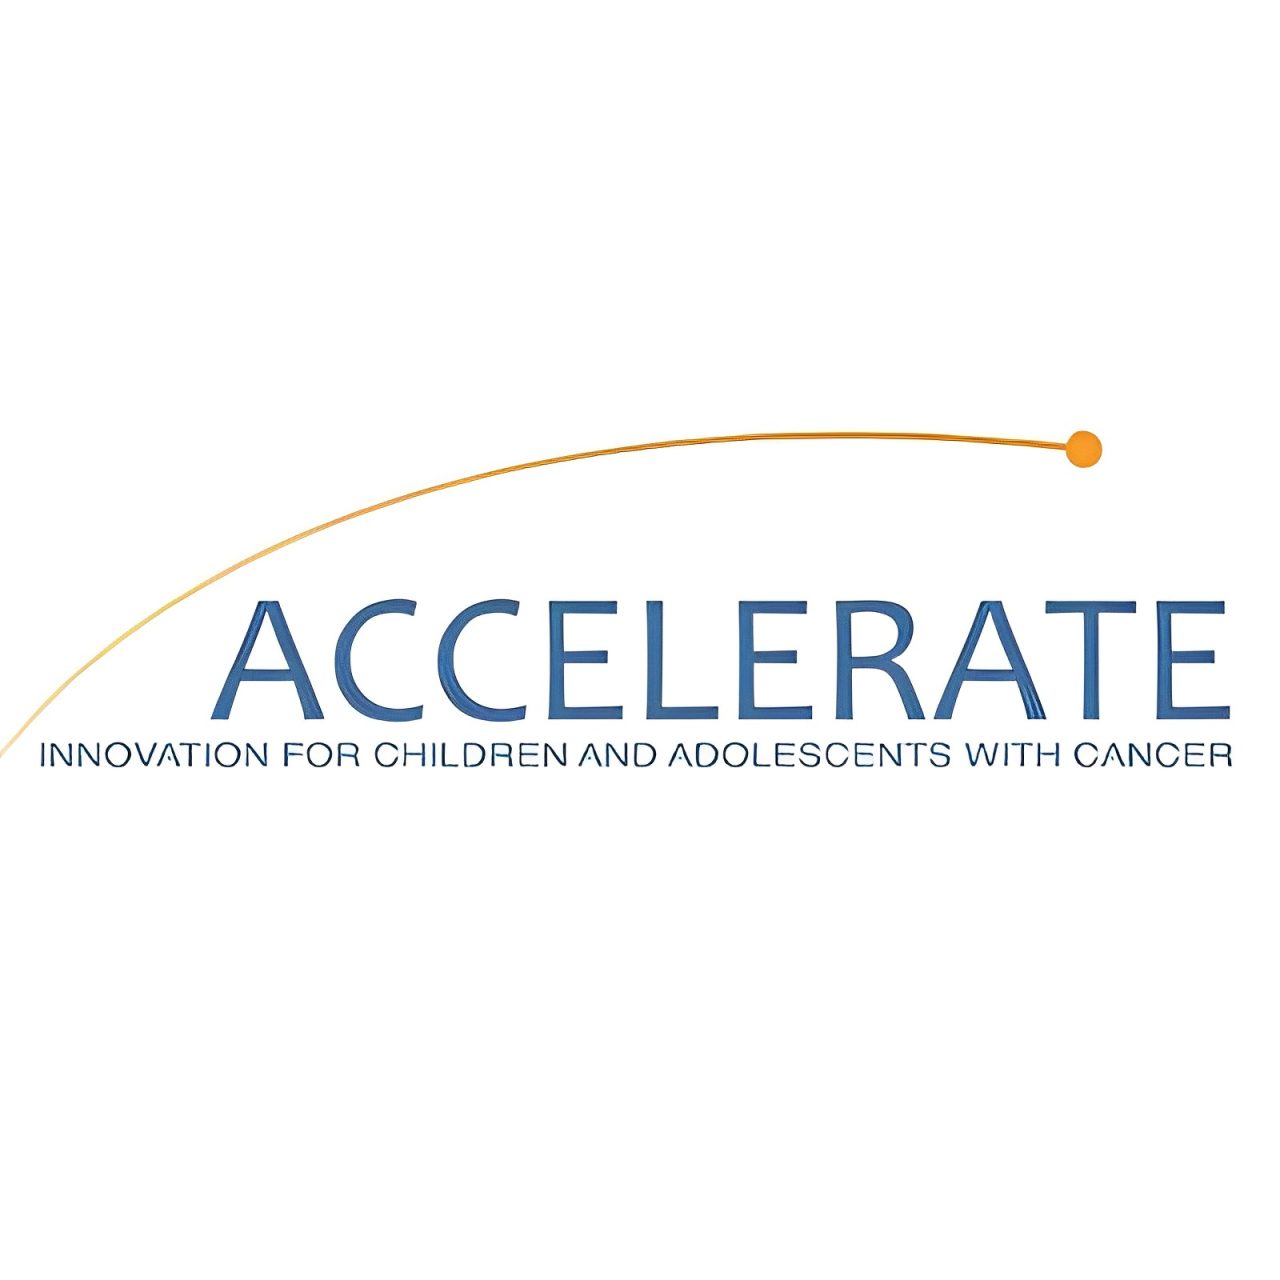 New ACCELERATE article published in the European Journal of Cancer – ACCELERATE Multi-Stakeholder Platform